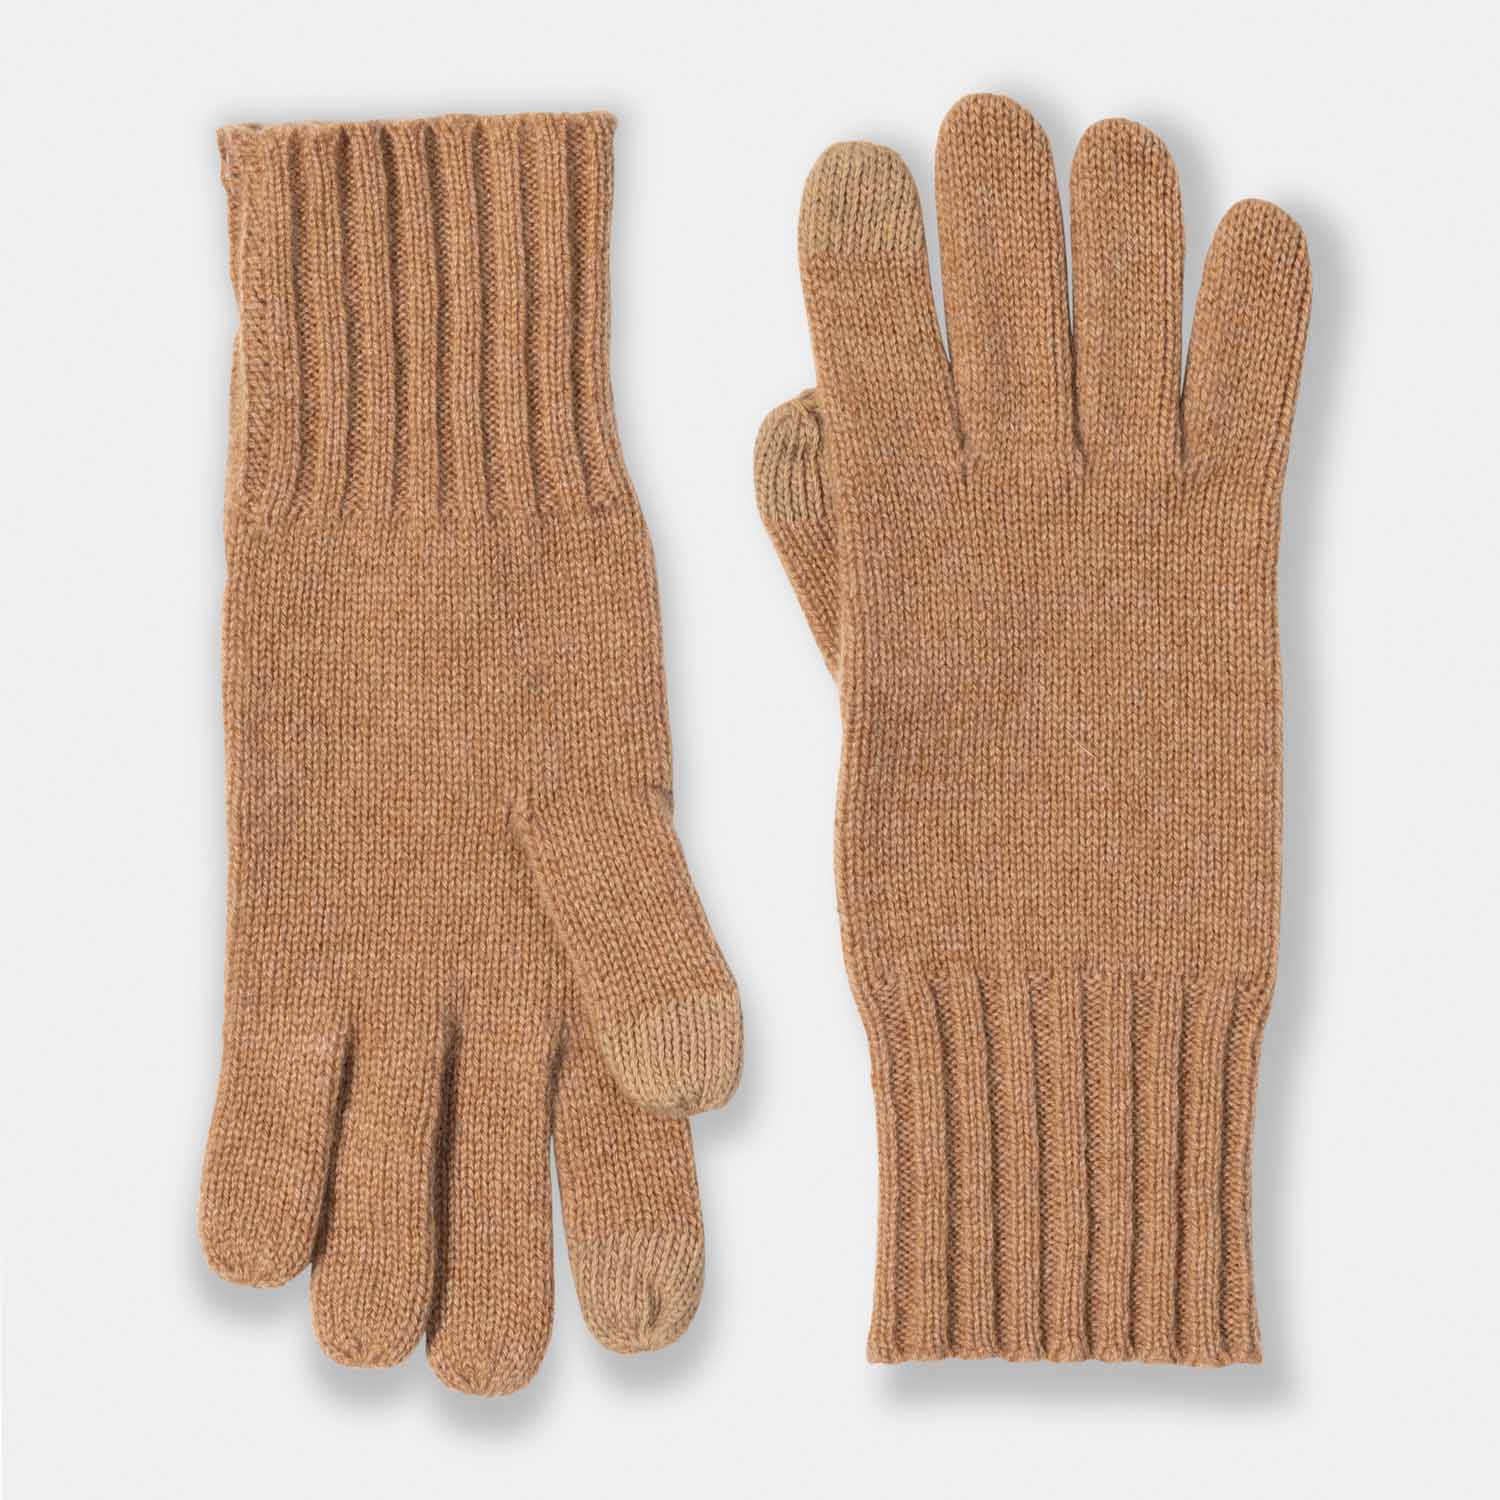 Picture of knit cashmere gloves with touch tech finger tips and rib cuff, charcoal.